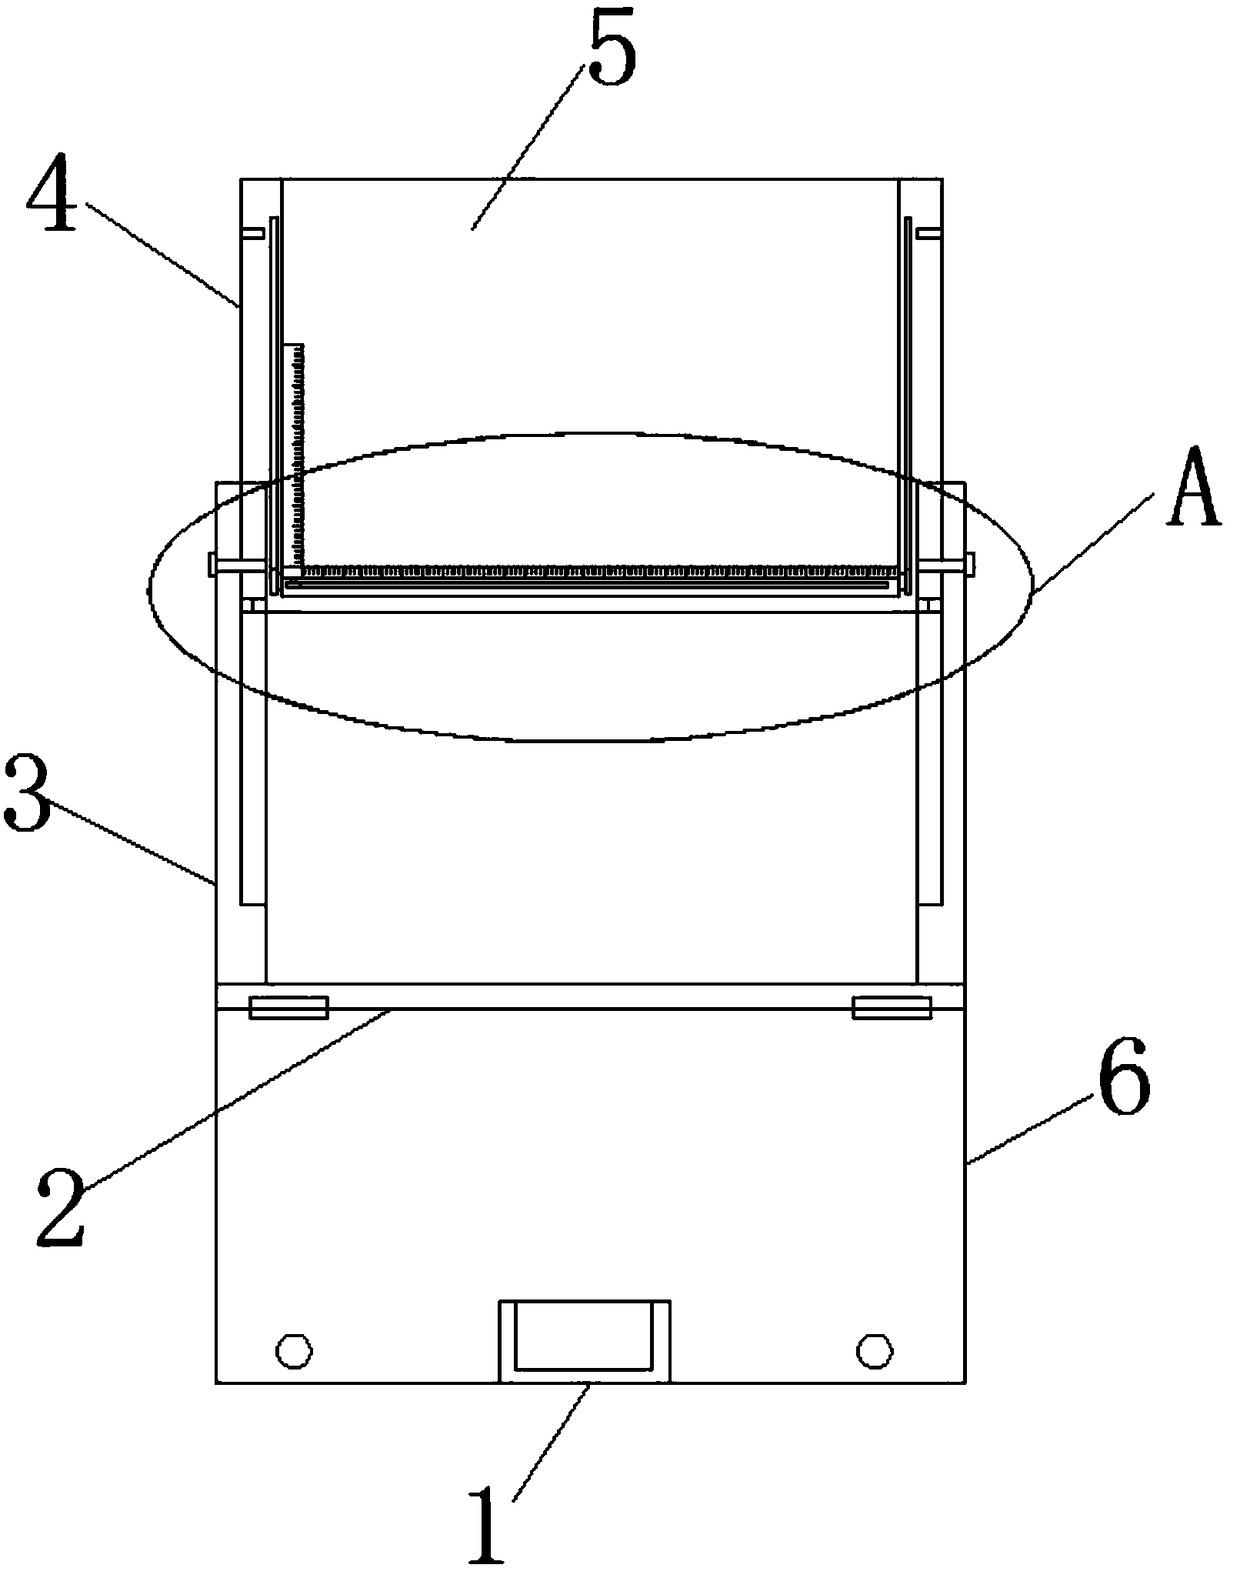 Artistic design teaching plate for installing ruler measurement structure